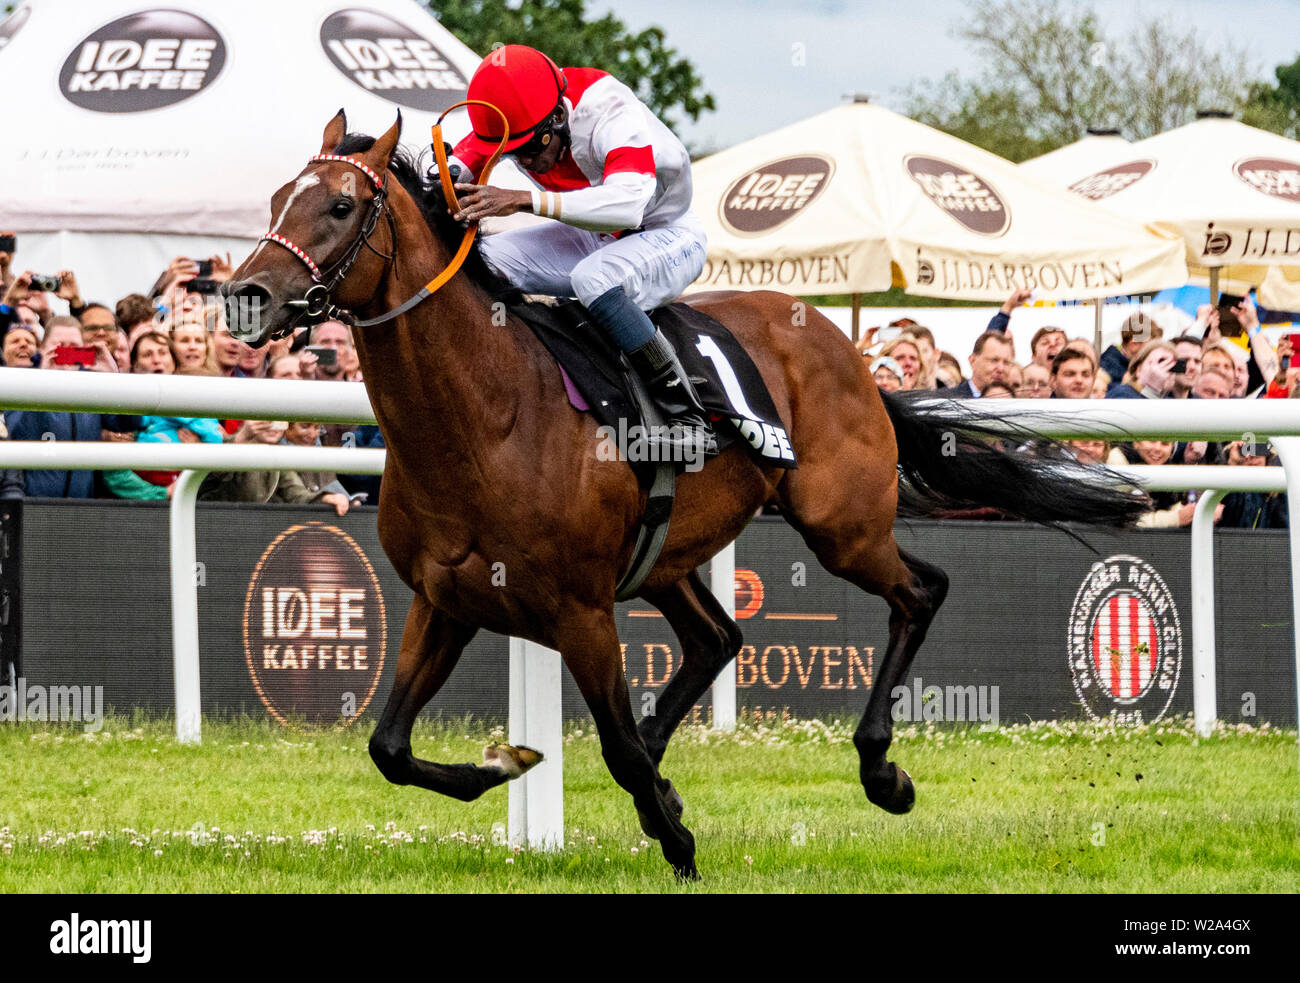 Hamburg, Germany. 07th July, 2019. Horse racing: Gallop, Derby Week Hamburg. Eduardo Pedroza on 'Laccario' from Gestüt Ittlingen crosses the finish line as the winner of the 150th German Derby. Credit: Axel Heimken/dpa/Alamy Live News Stock Photo